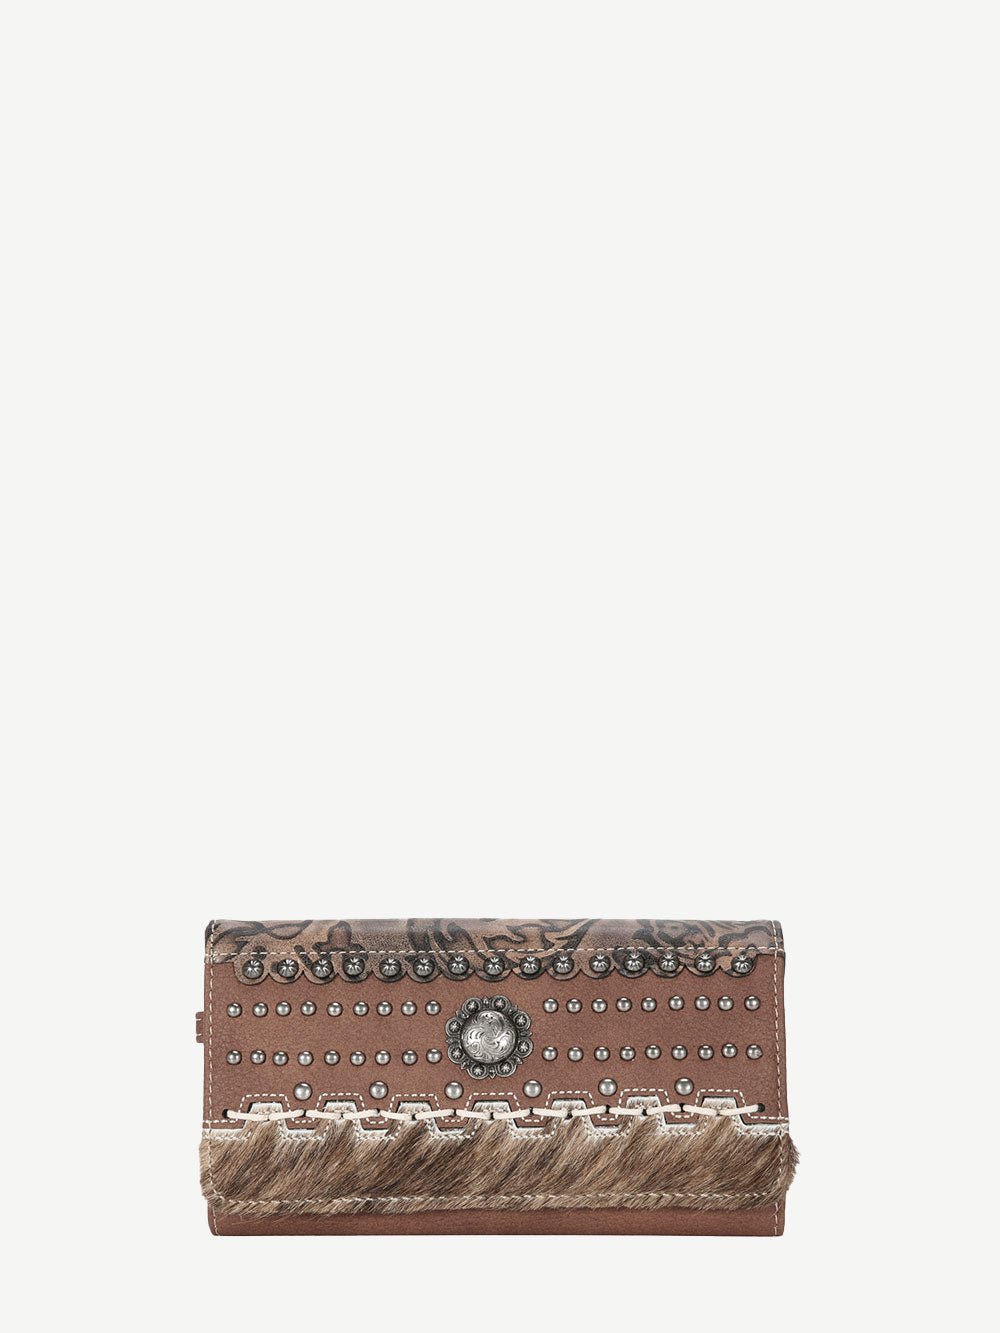 Trinity Ranch Hair-On Cowhide Embossed Floral Concho Wallet - Montana West World